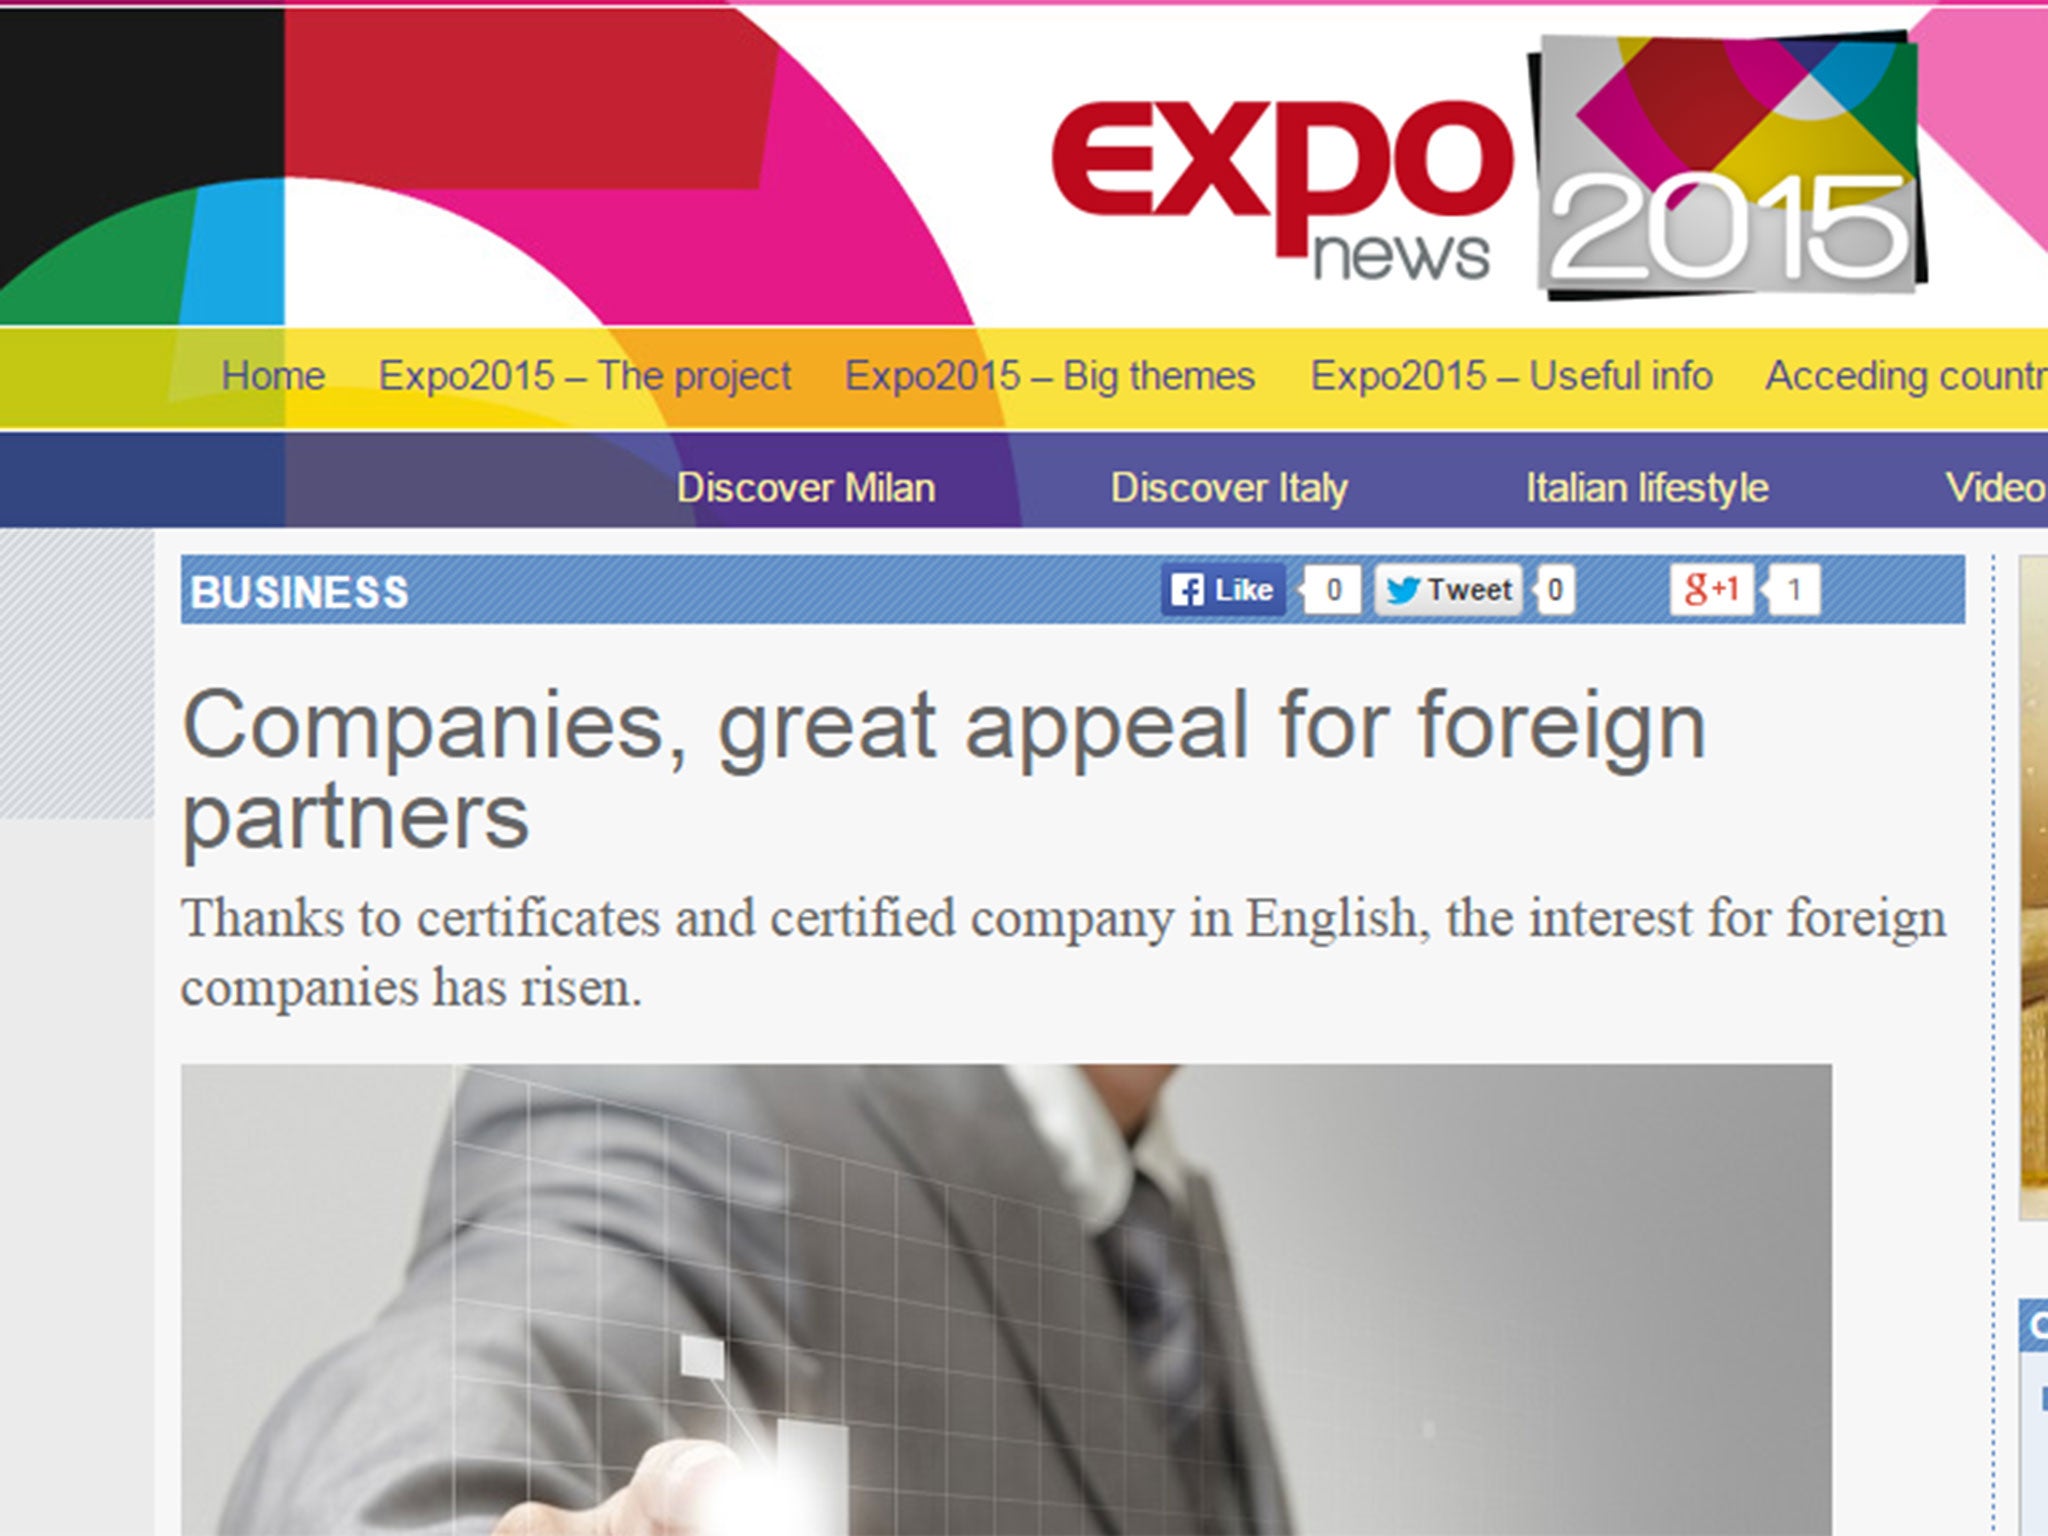 'Certificates and certified company in English' are offered at Expo 2015 in Milan, apparently